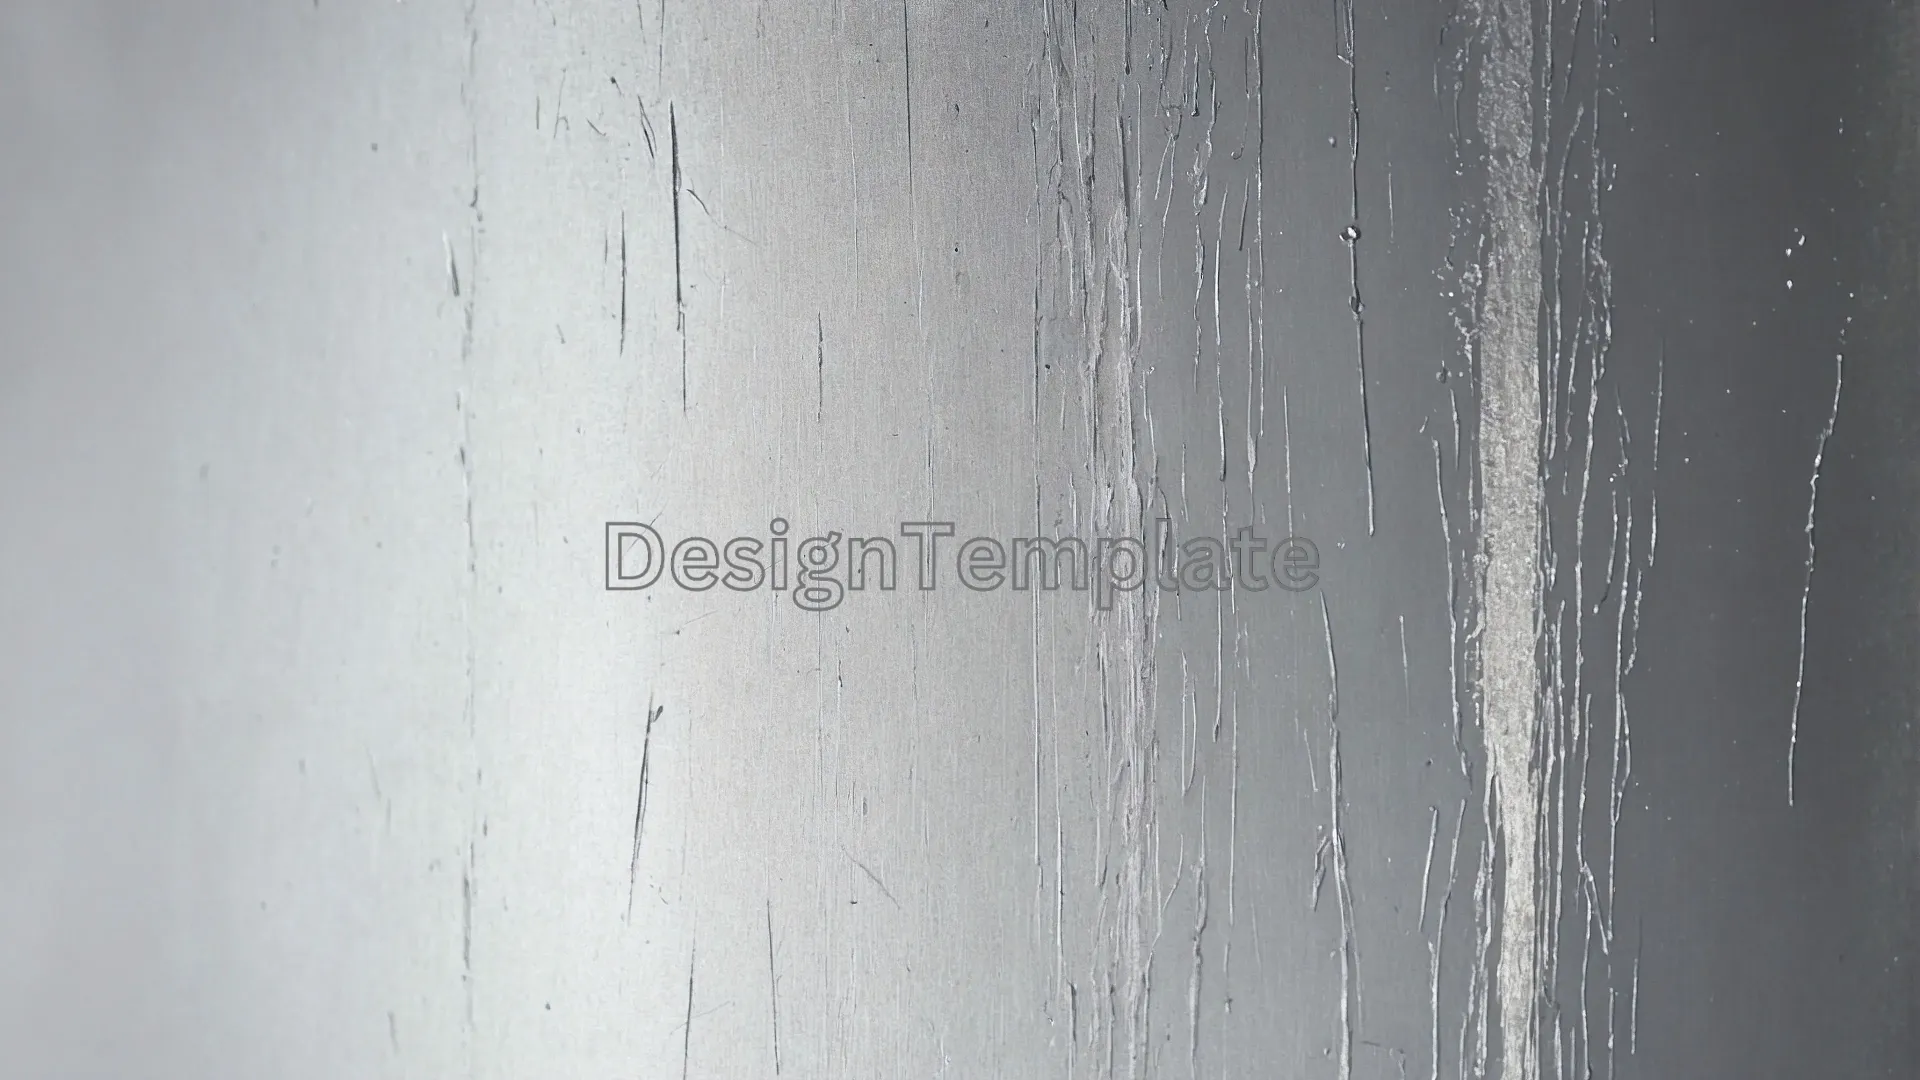 Scratches Silver Metallic Texture Image